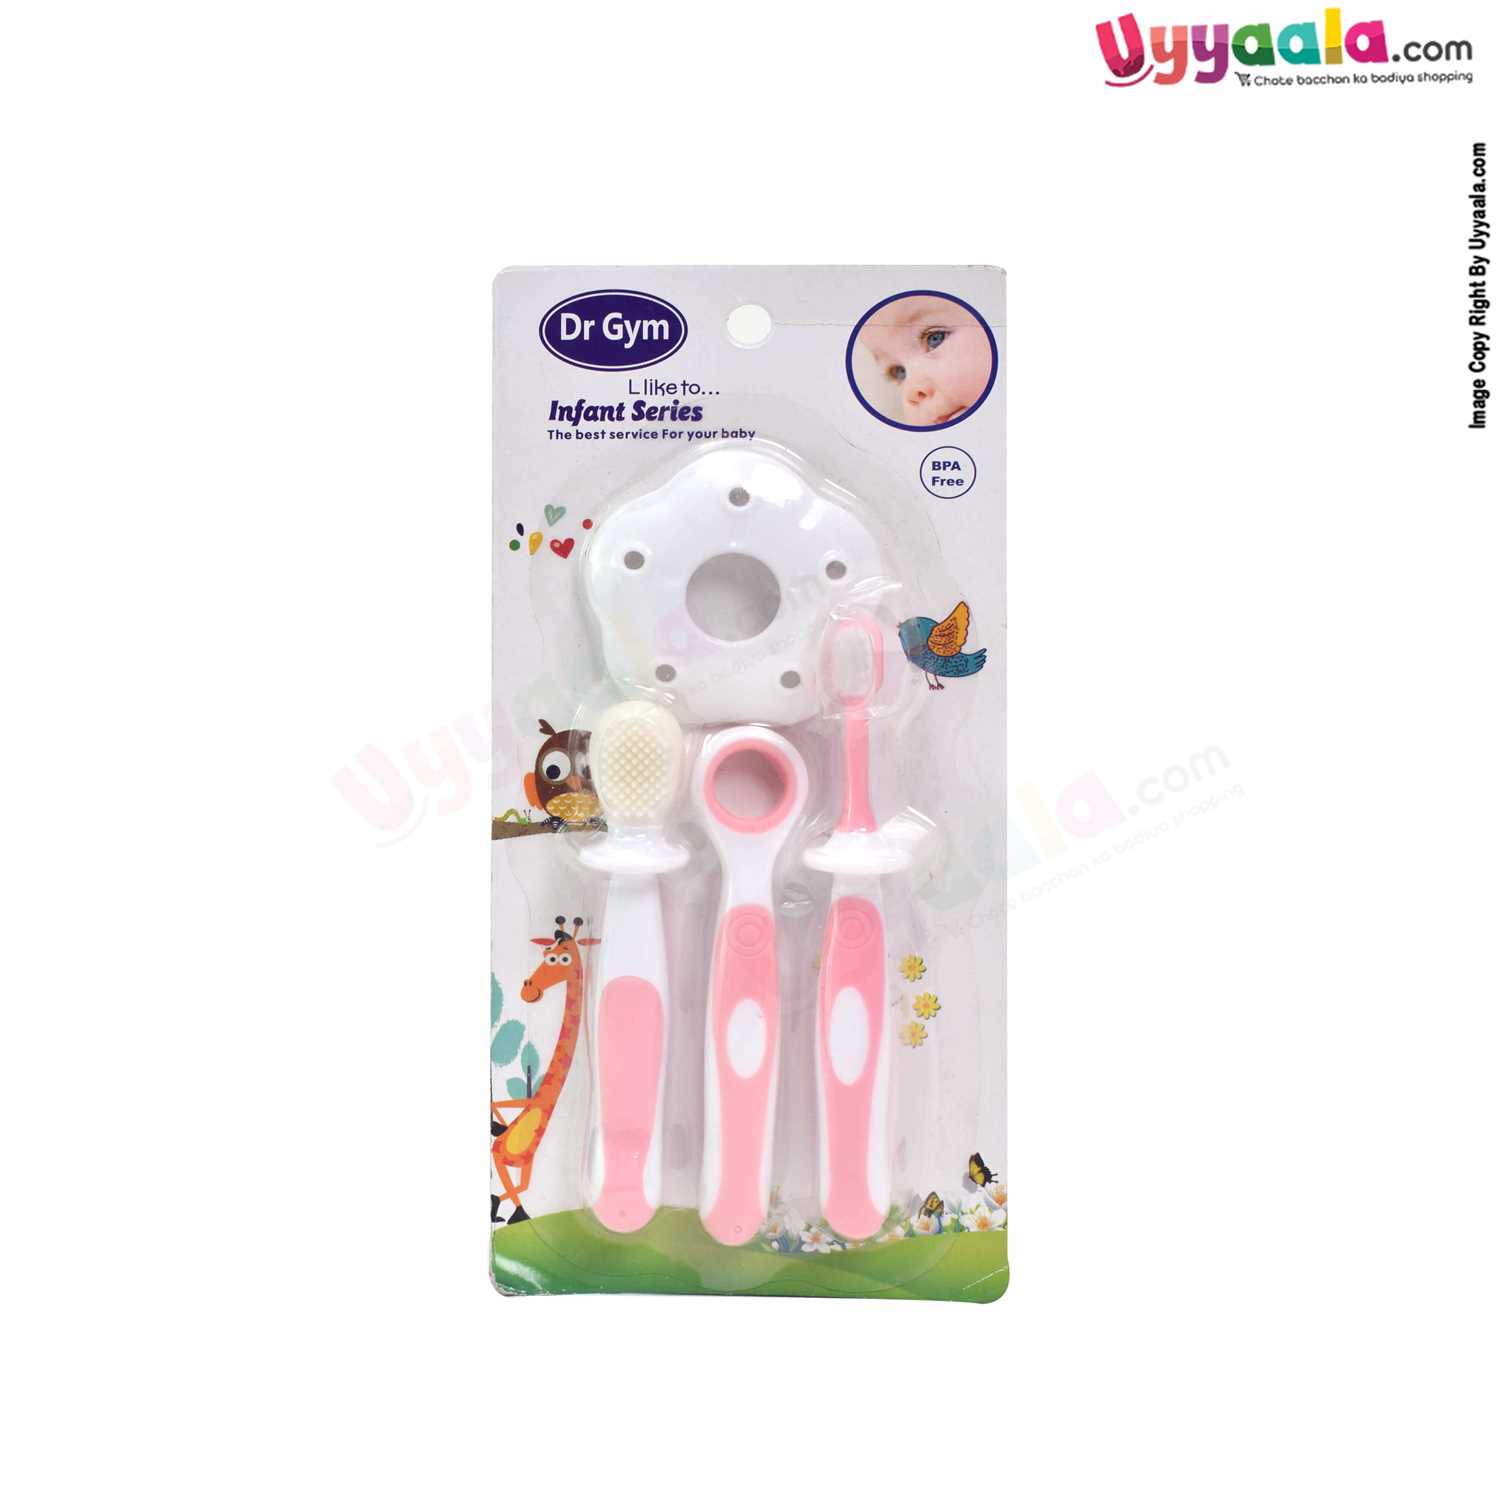 Buy Dr Gym Toothbrush Set with Anti-choking Shield for Small Babies Online in India at uyyaala.com